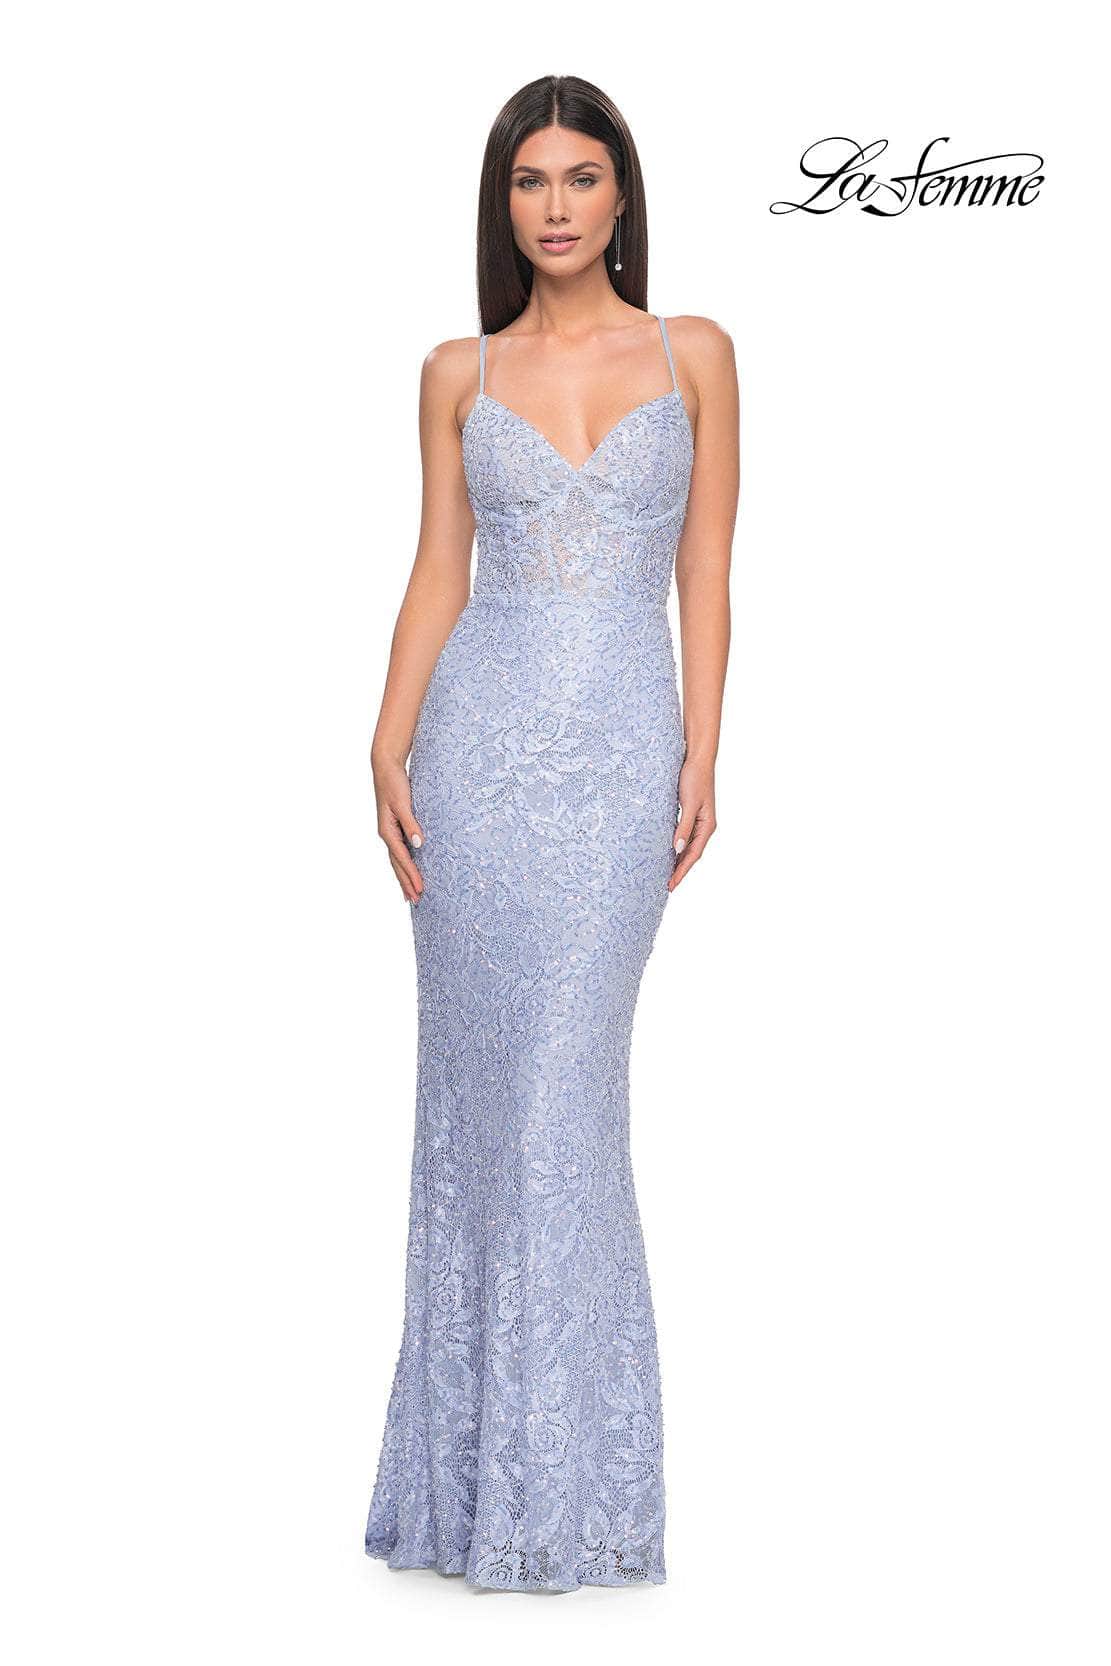 La Femme 32434 - Allover Lace Sleeveless Prom Gown
